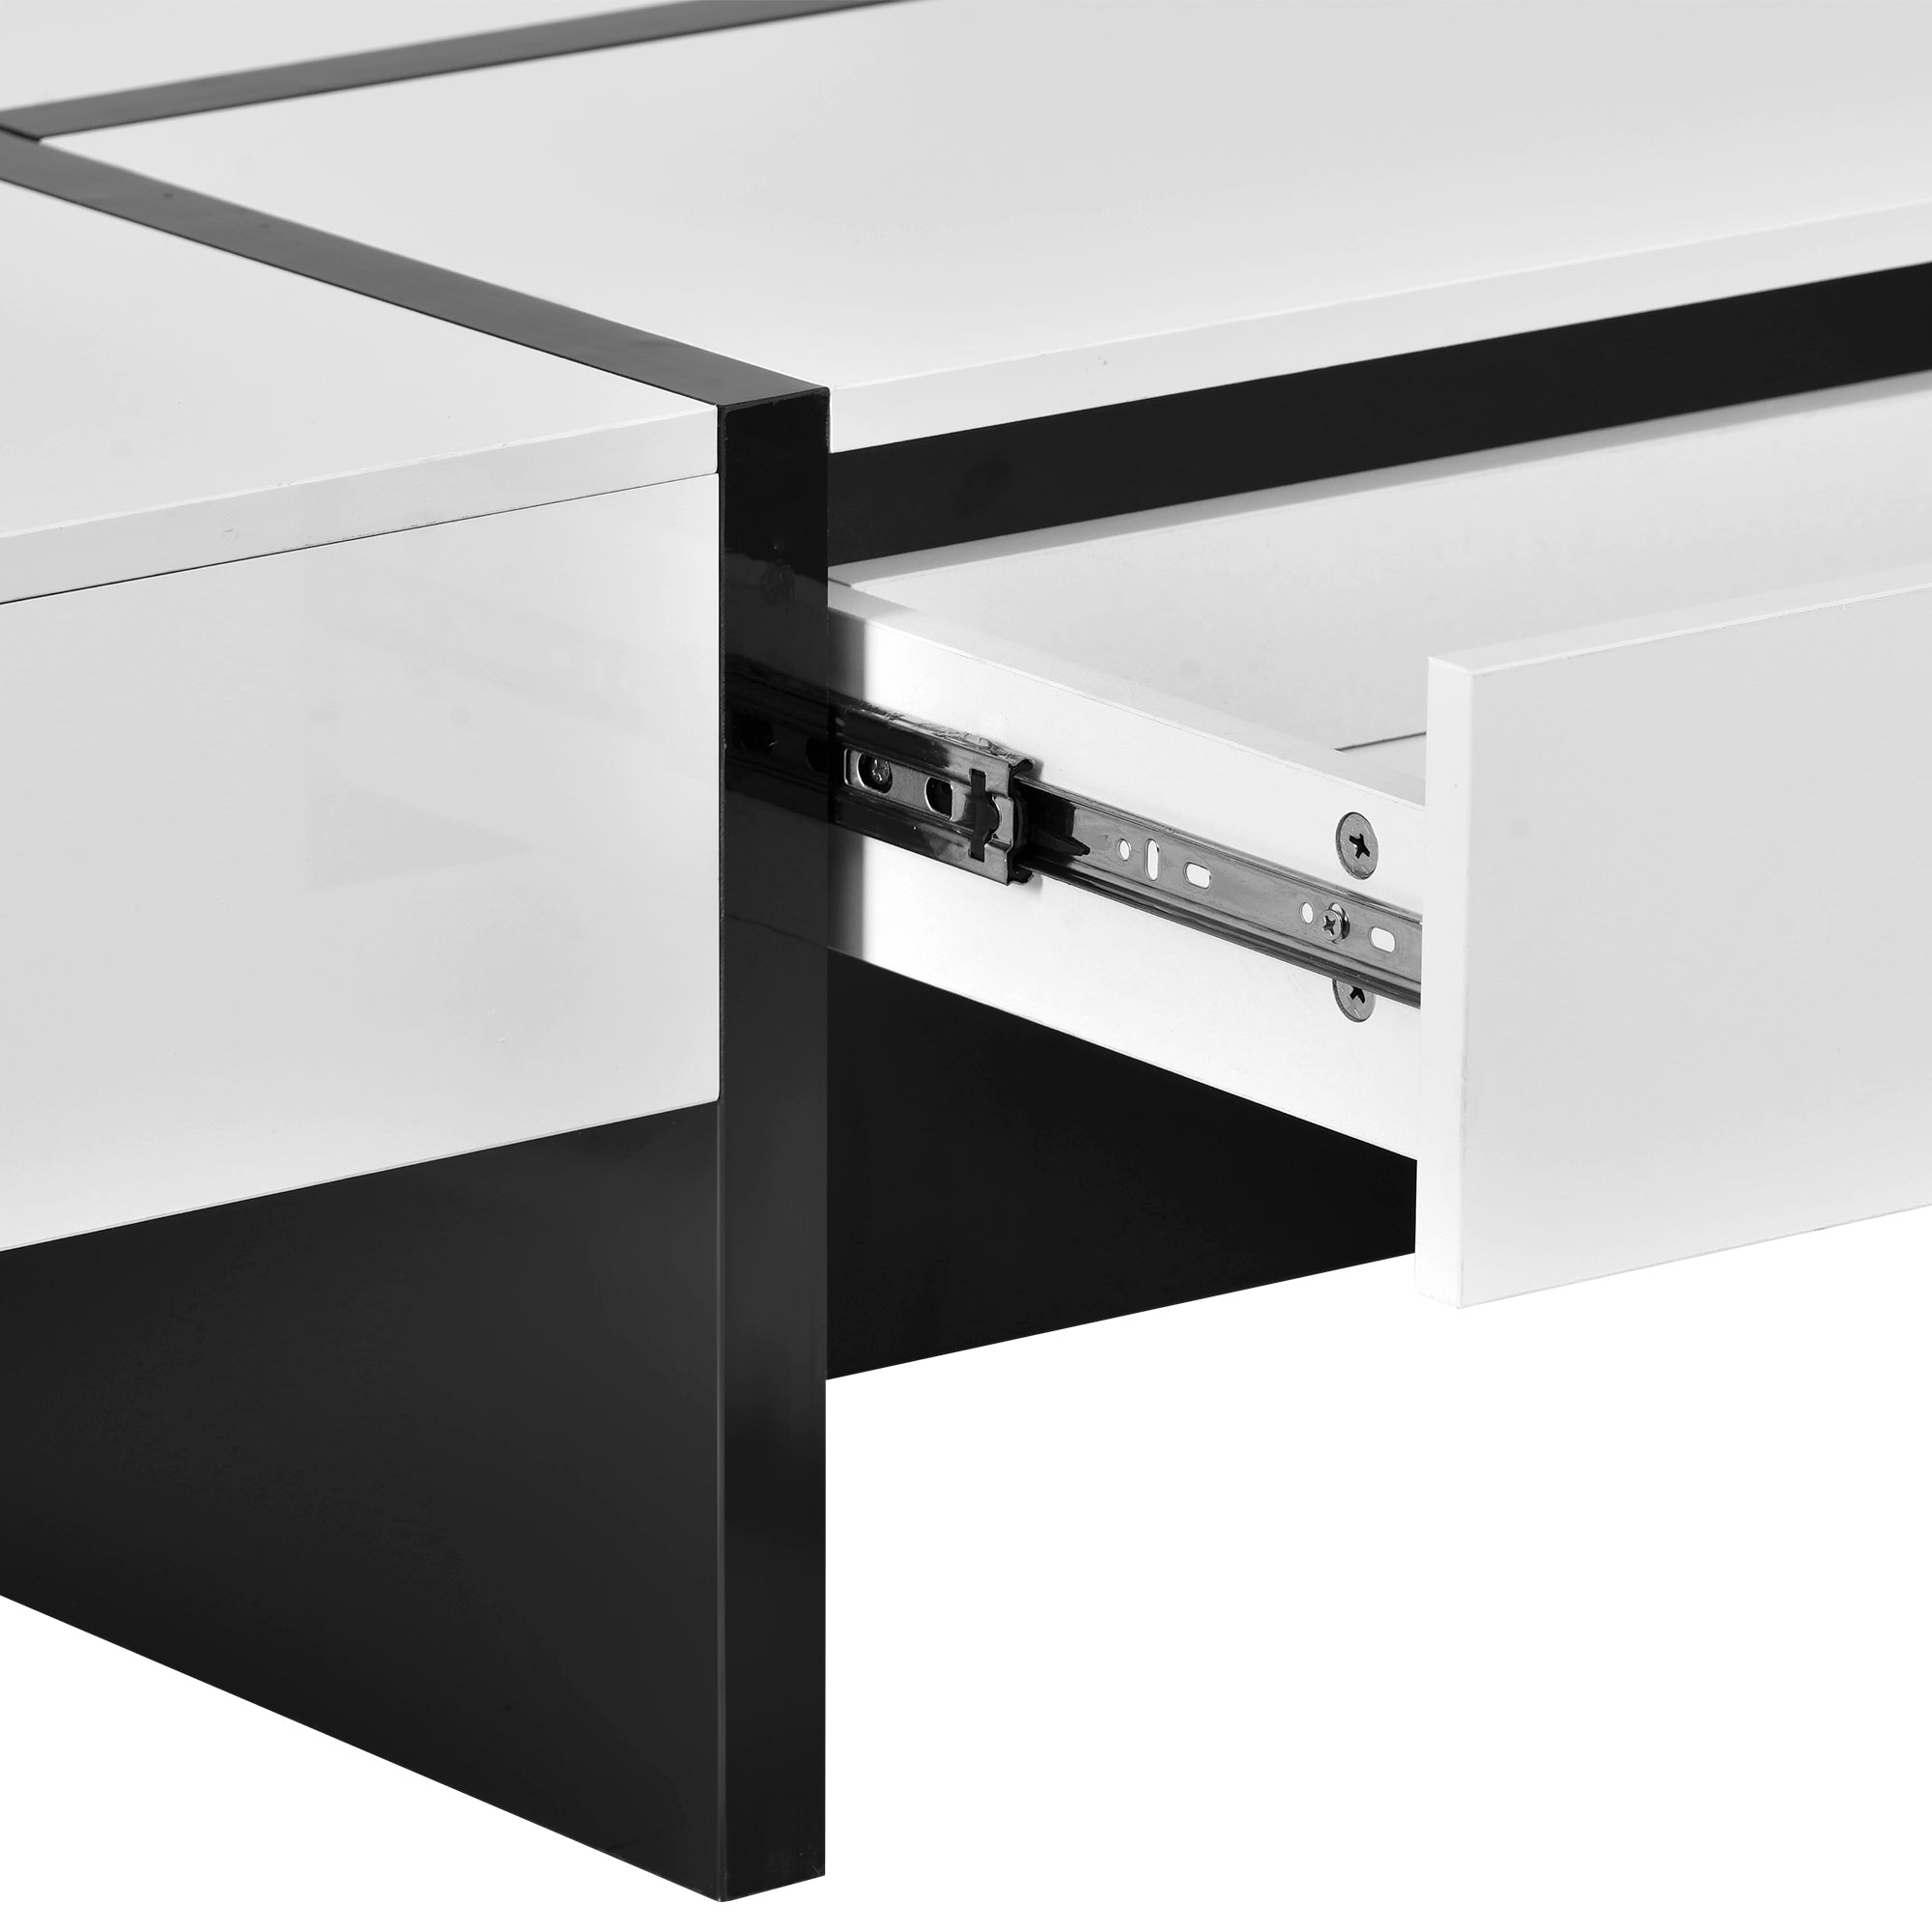 45.20" Modern Rectangle White High Glossy Coffee Table with Black Trim Line Design